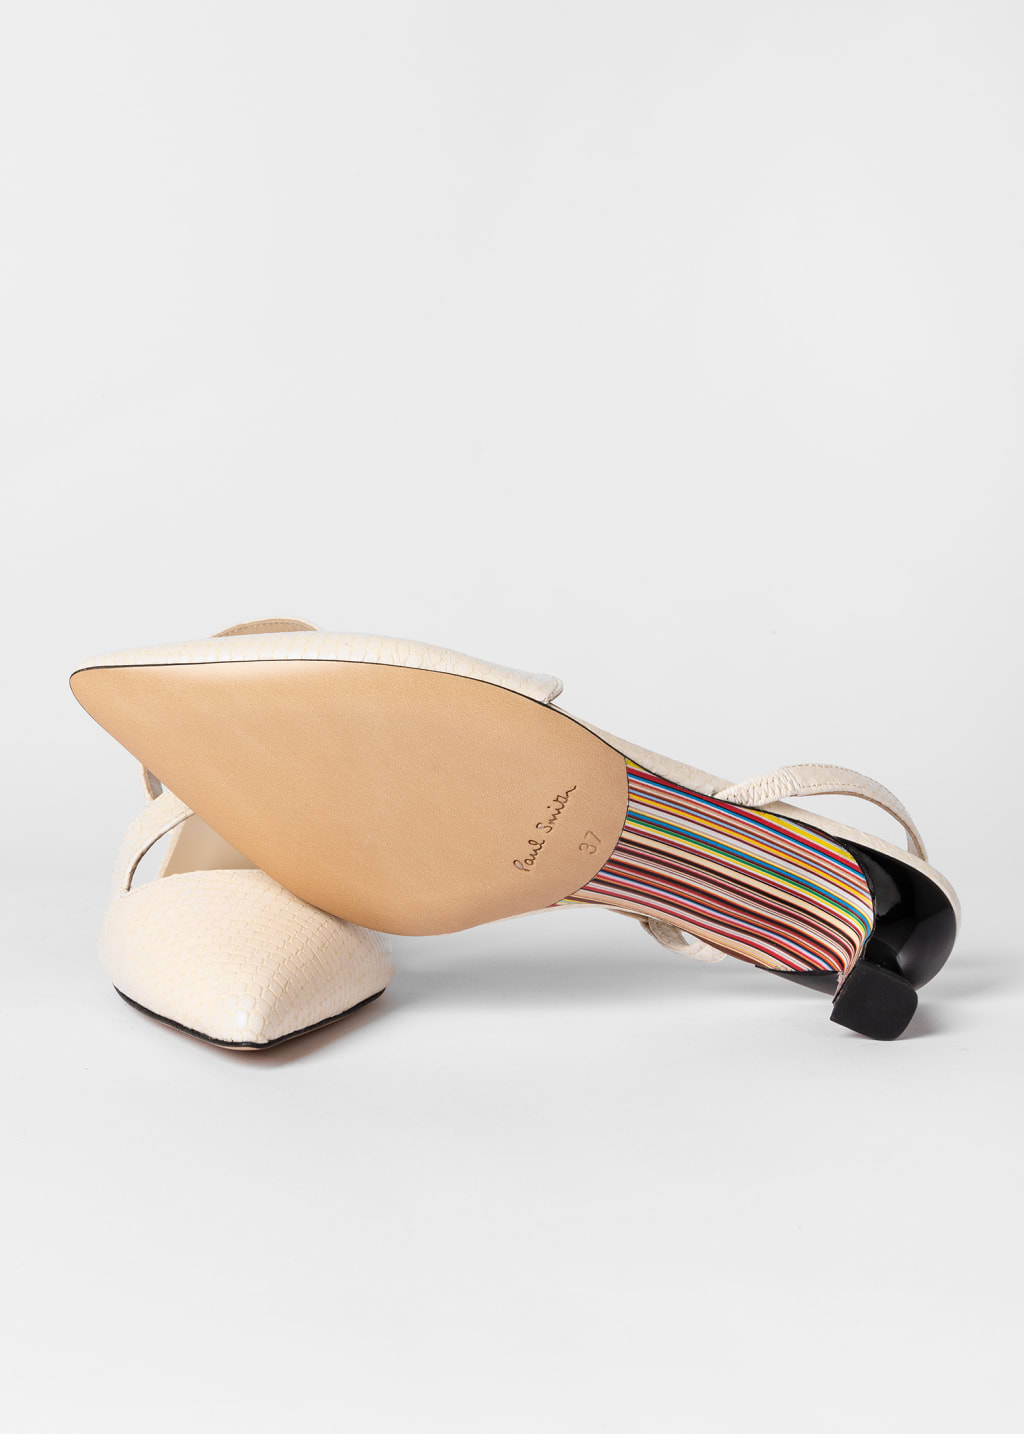 Detail View - Women's Sand 'Cloudy' Suede Heels Paul Smith